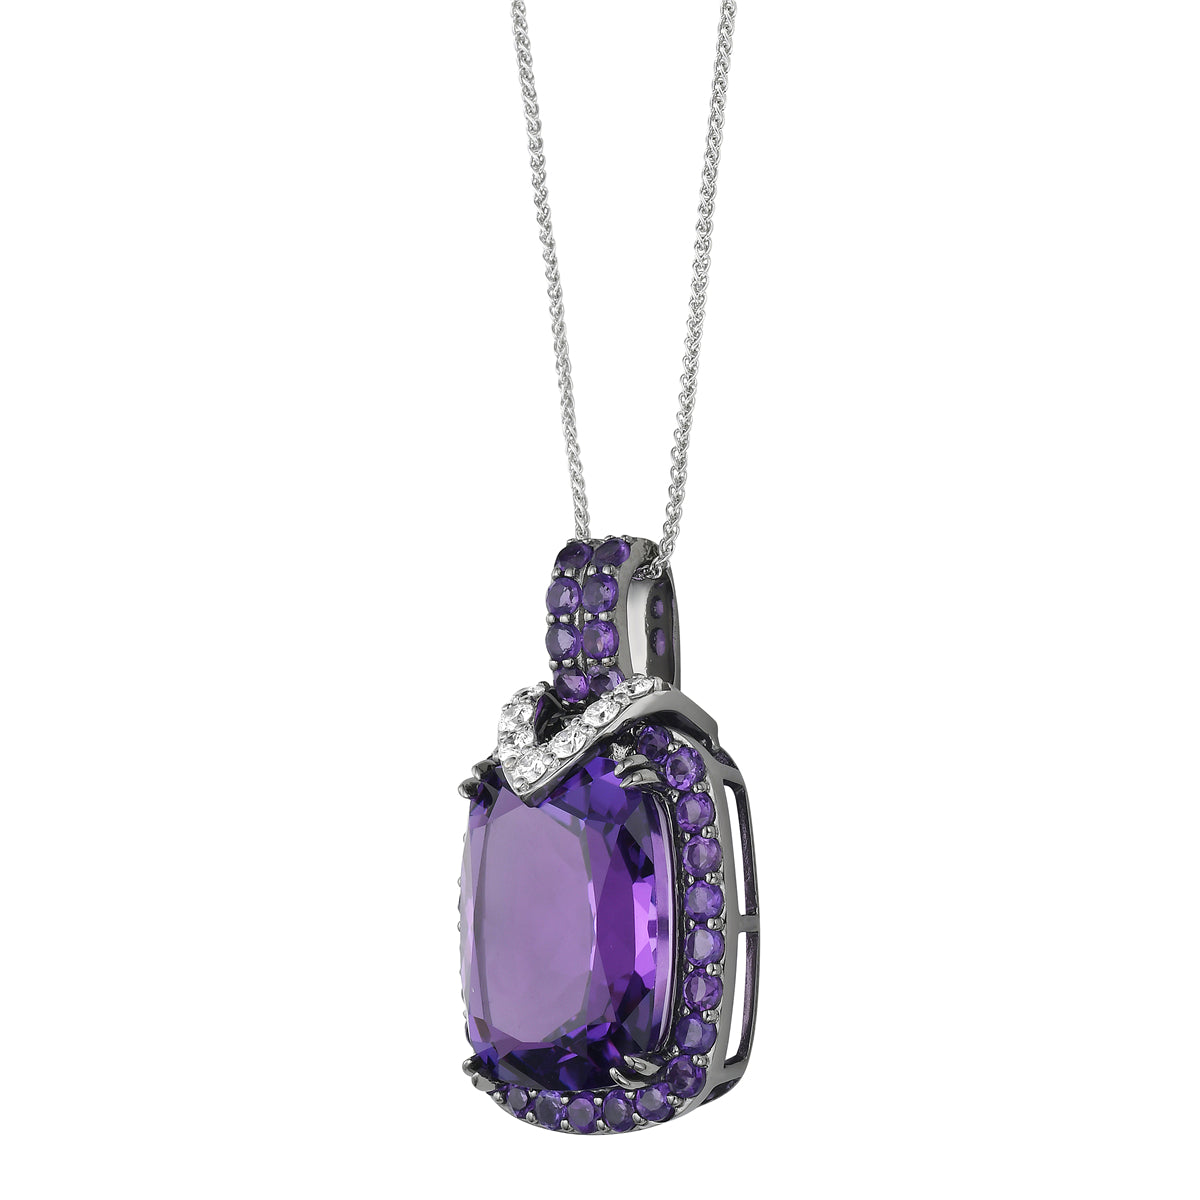 Pendant 14KB/4.2G 1AME-10.05CT 32AME -1.09CT 7RD-0.22CT Amethyst